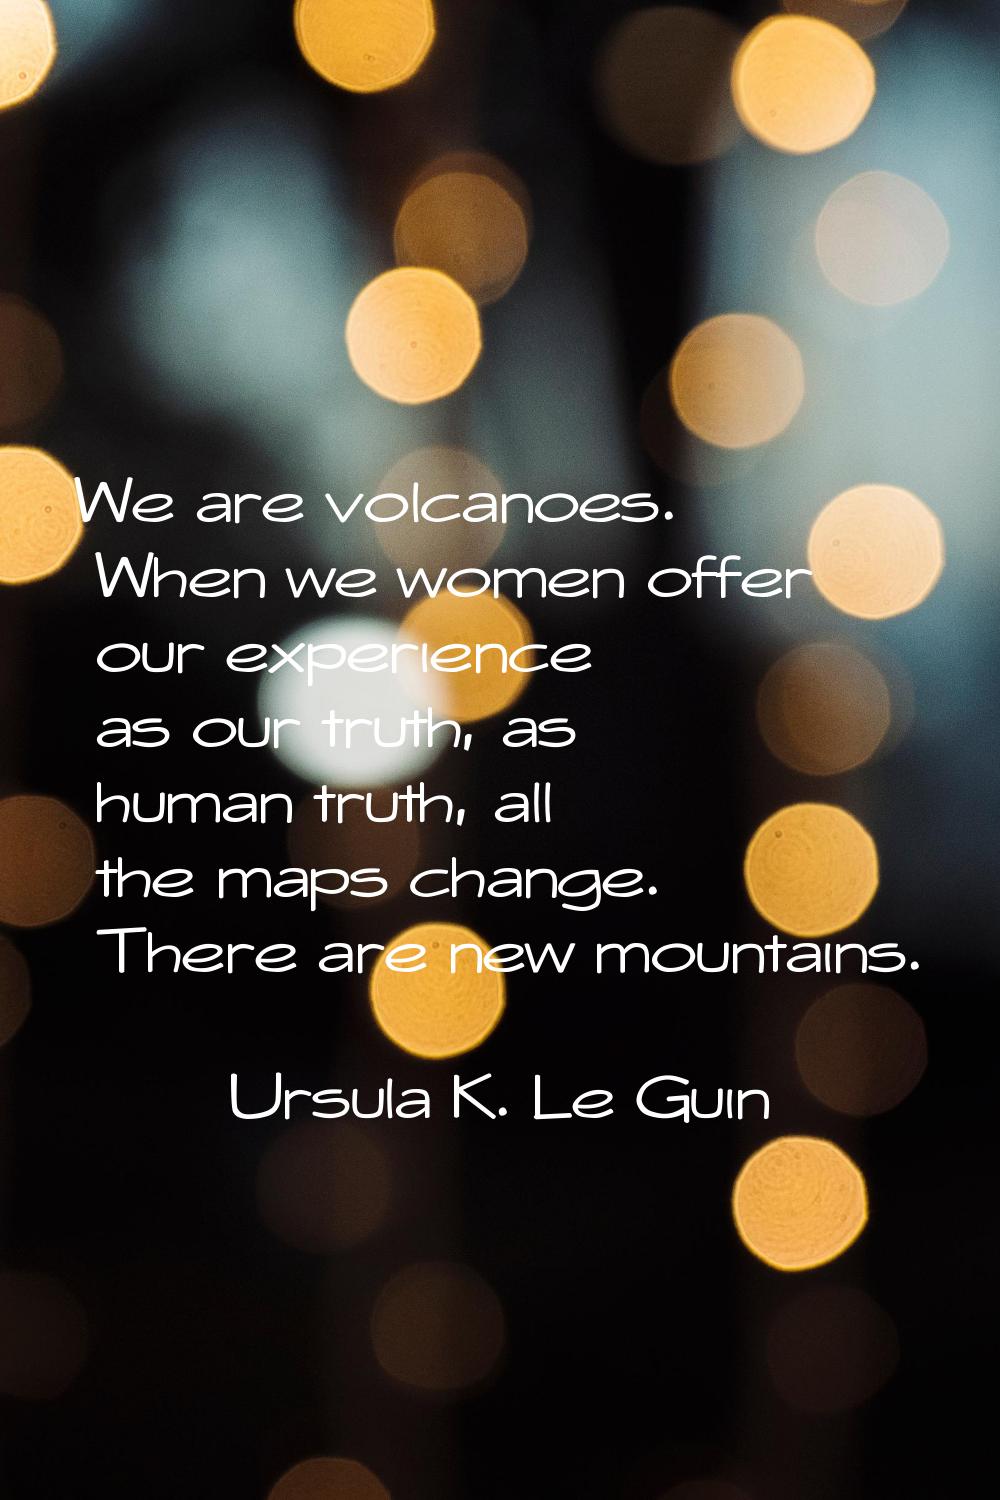 We are volcanoes. When we women offer our experience as our truth, as human truth, all the maps cha